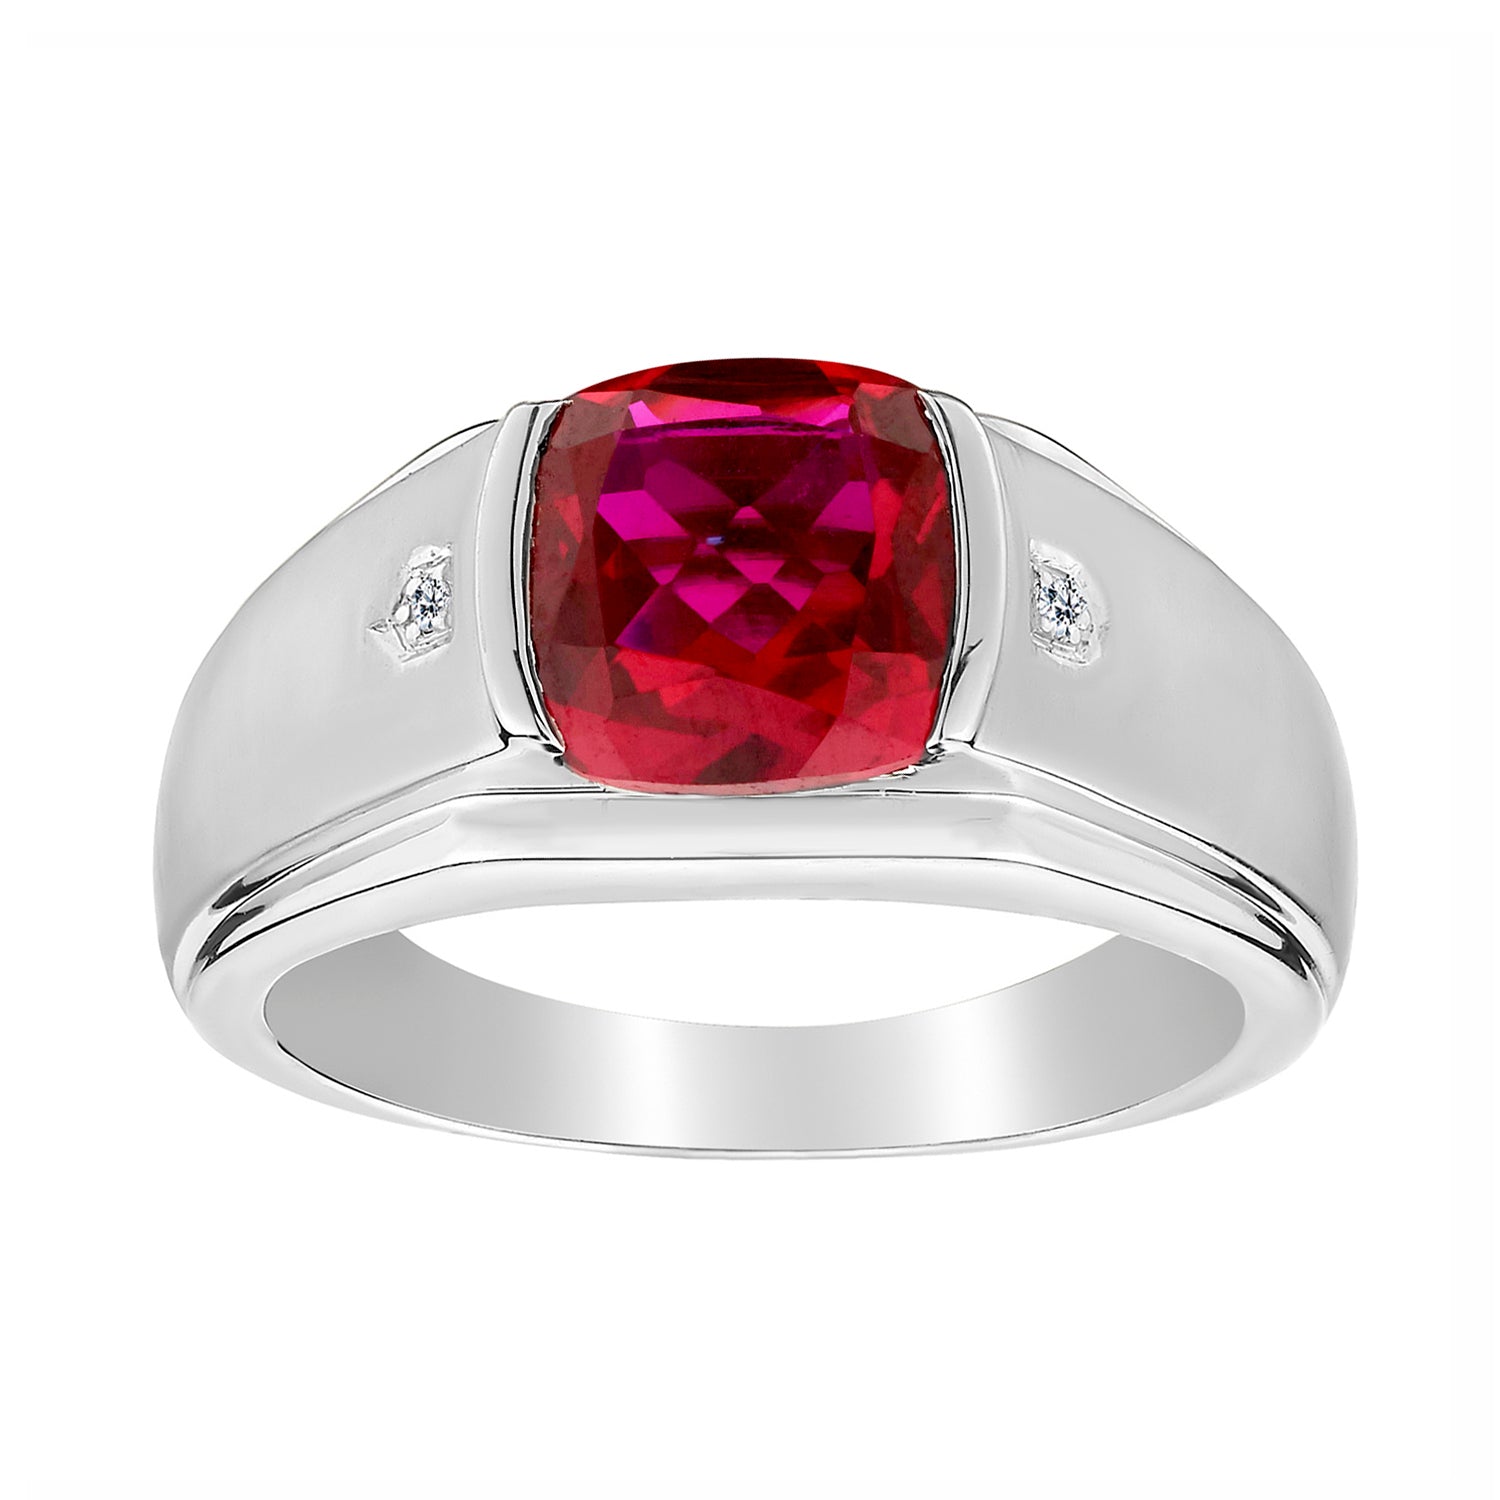 Authentic real 6 carat ruby (manak) stone 925 sterling silver handmade ring  band for both men's and girl's, best Astro ring sr378 | TRIBAL ORNAMENTS